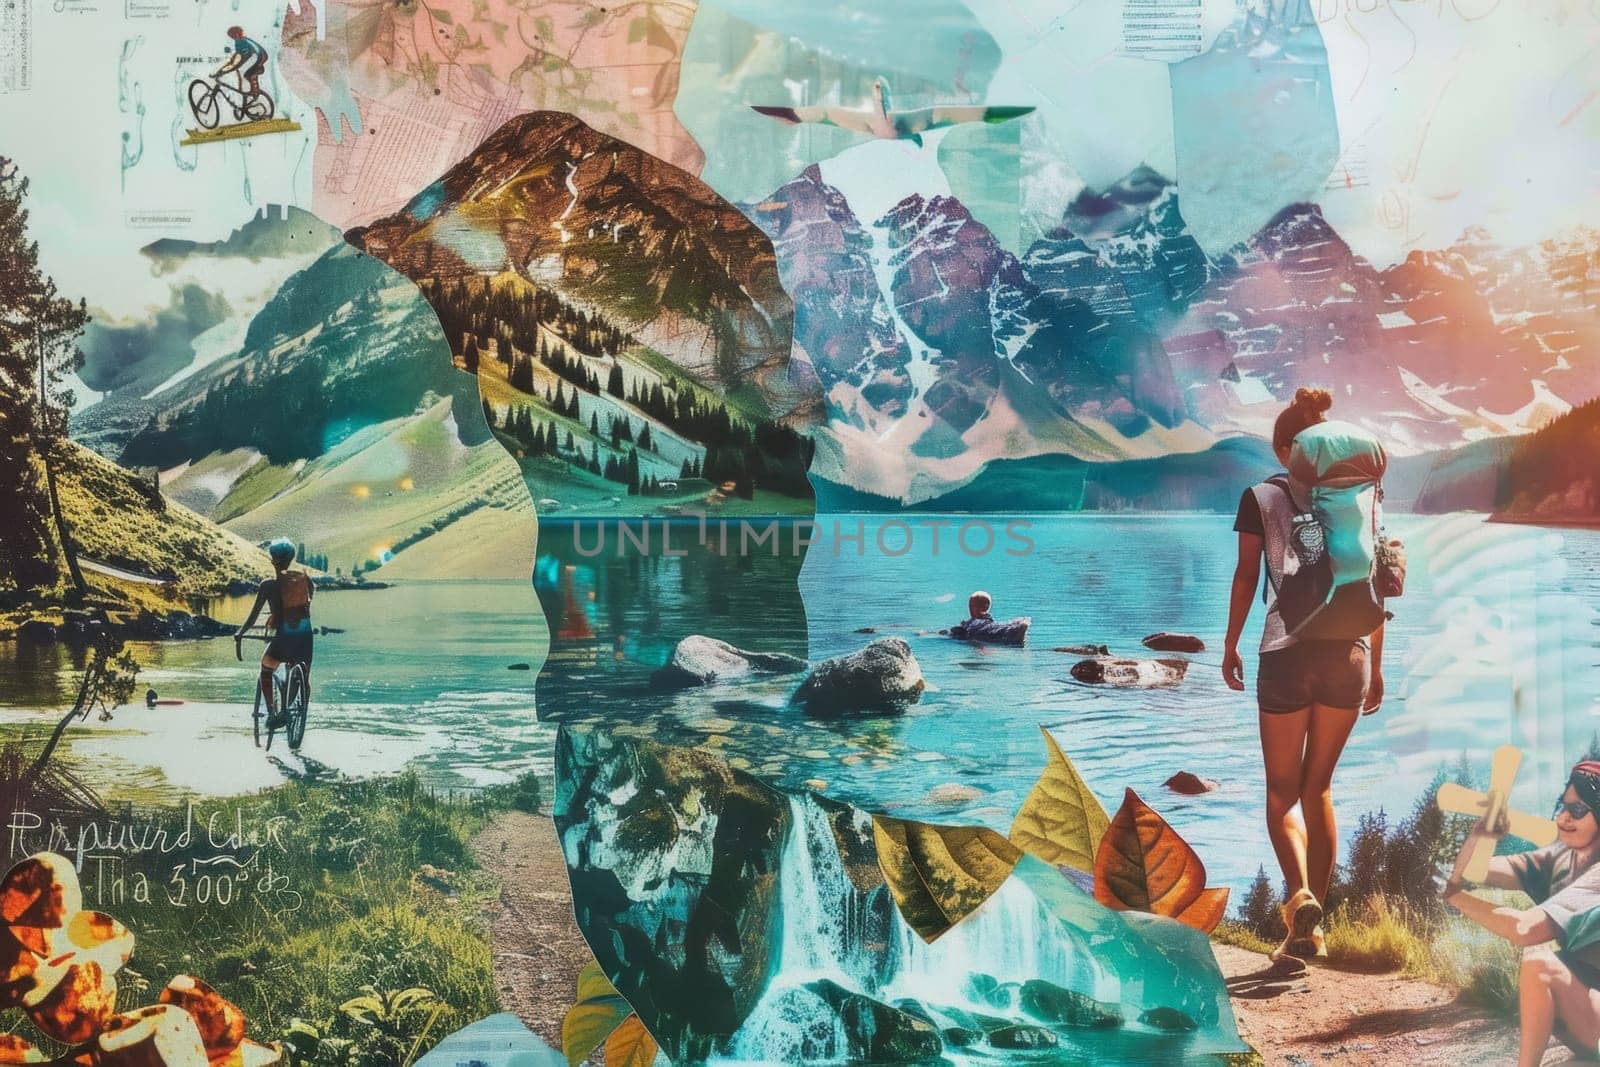 This collage art captures the essence of outdoor adventures, with scenes of cycling, hiking, and nature seamlessly blended together in a vibrant composition